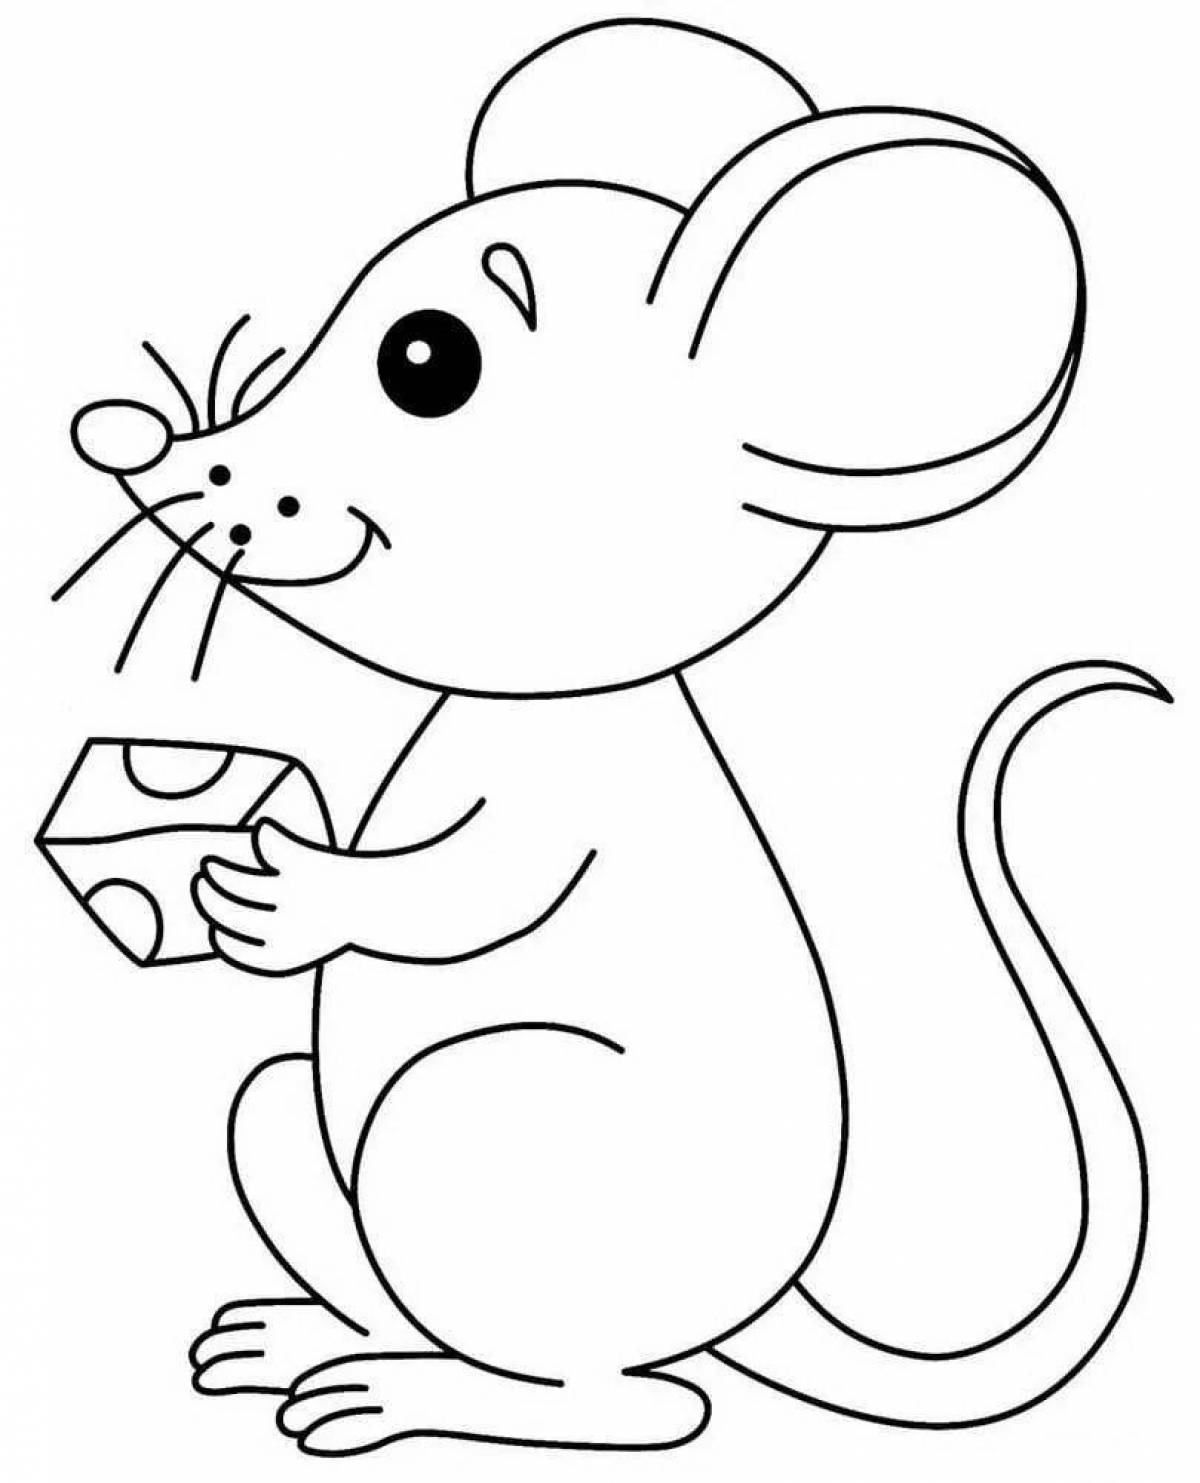 Live mouse coloring book for kids